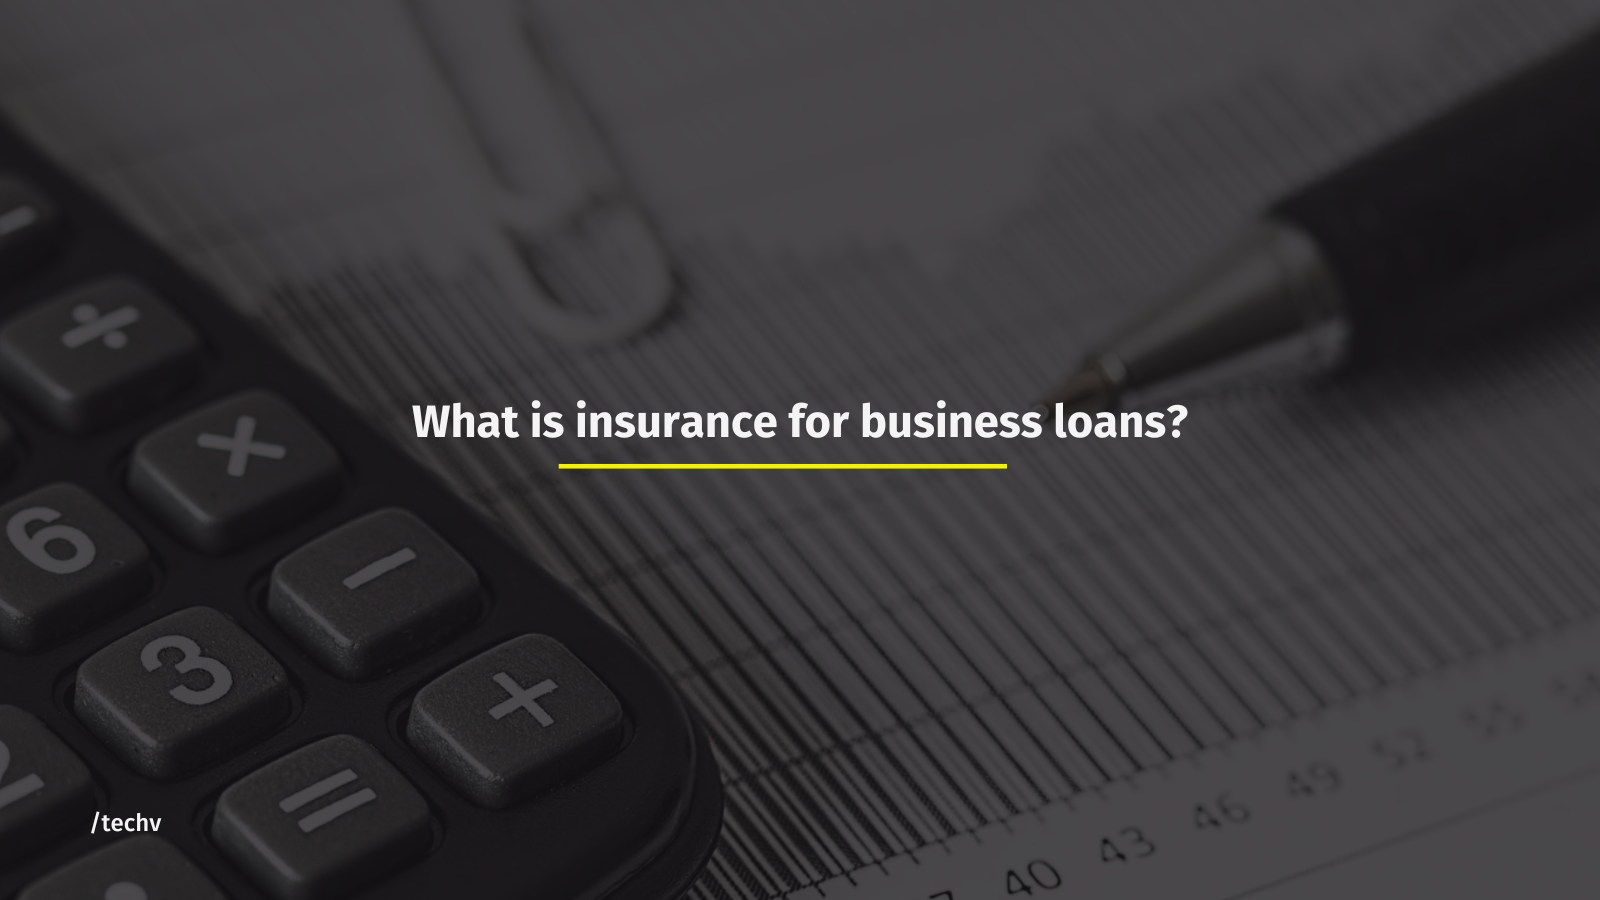 What is insurance for business loans? Tell us here!